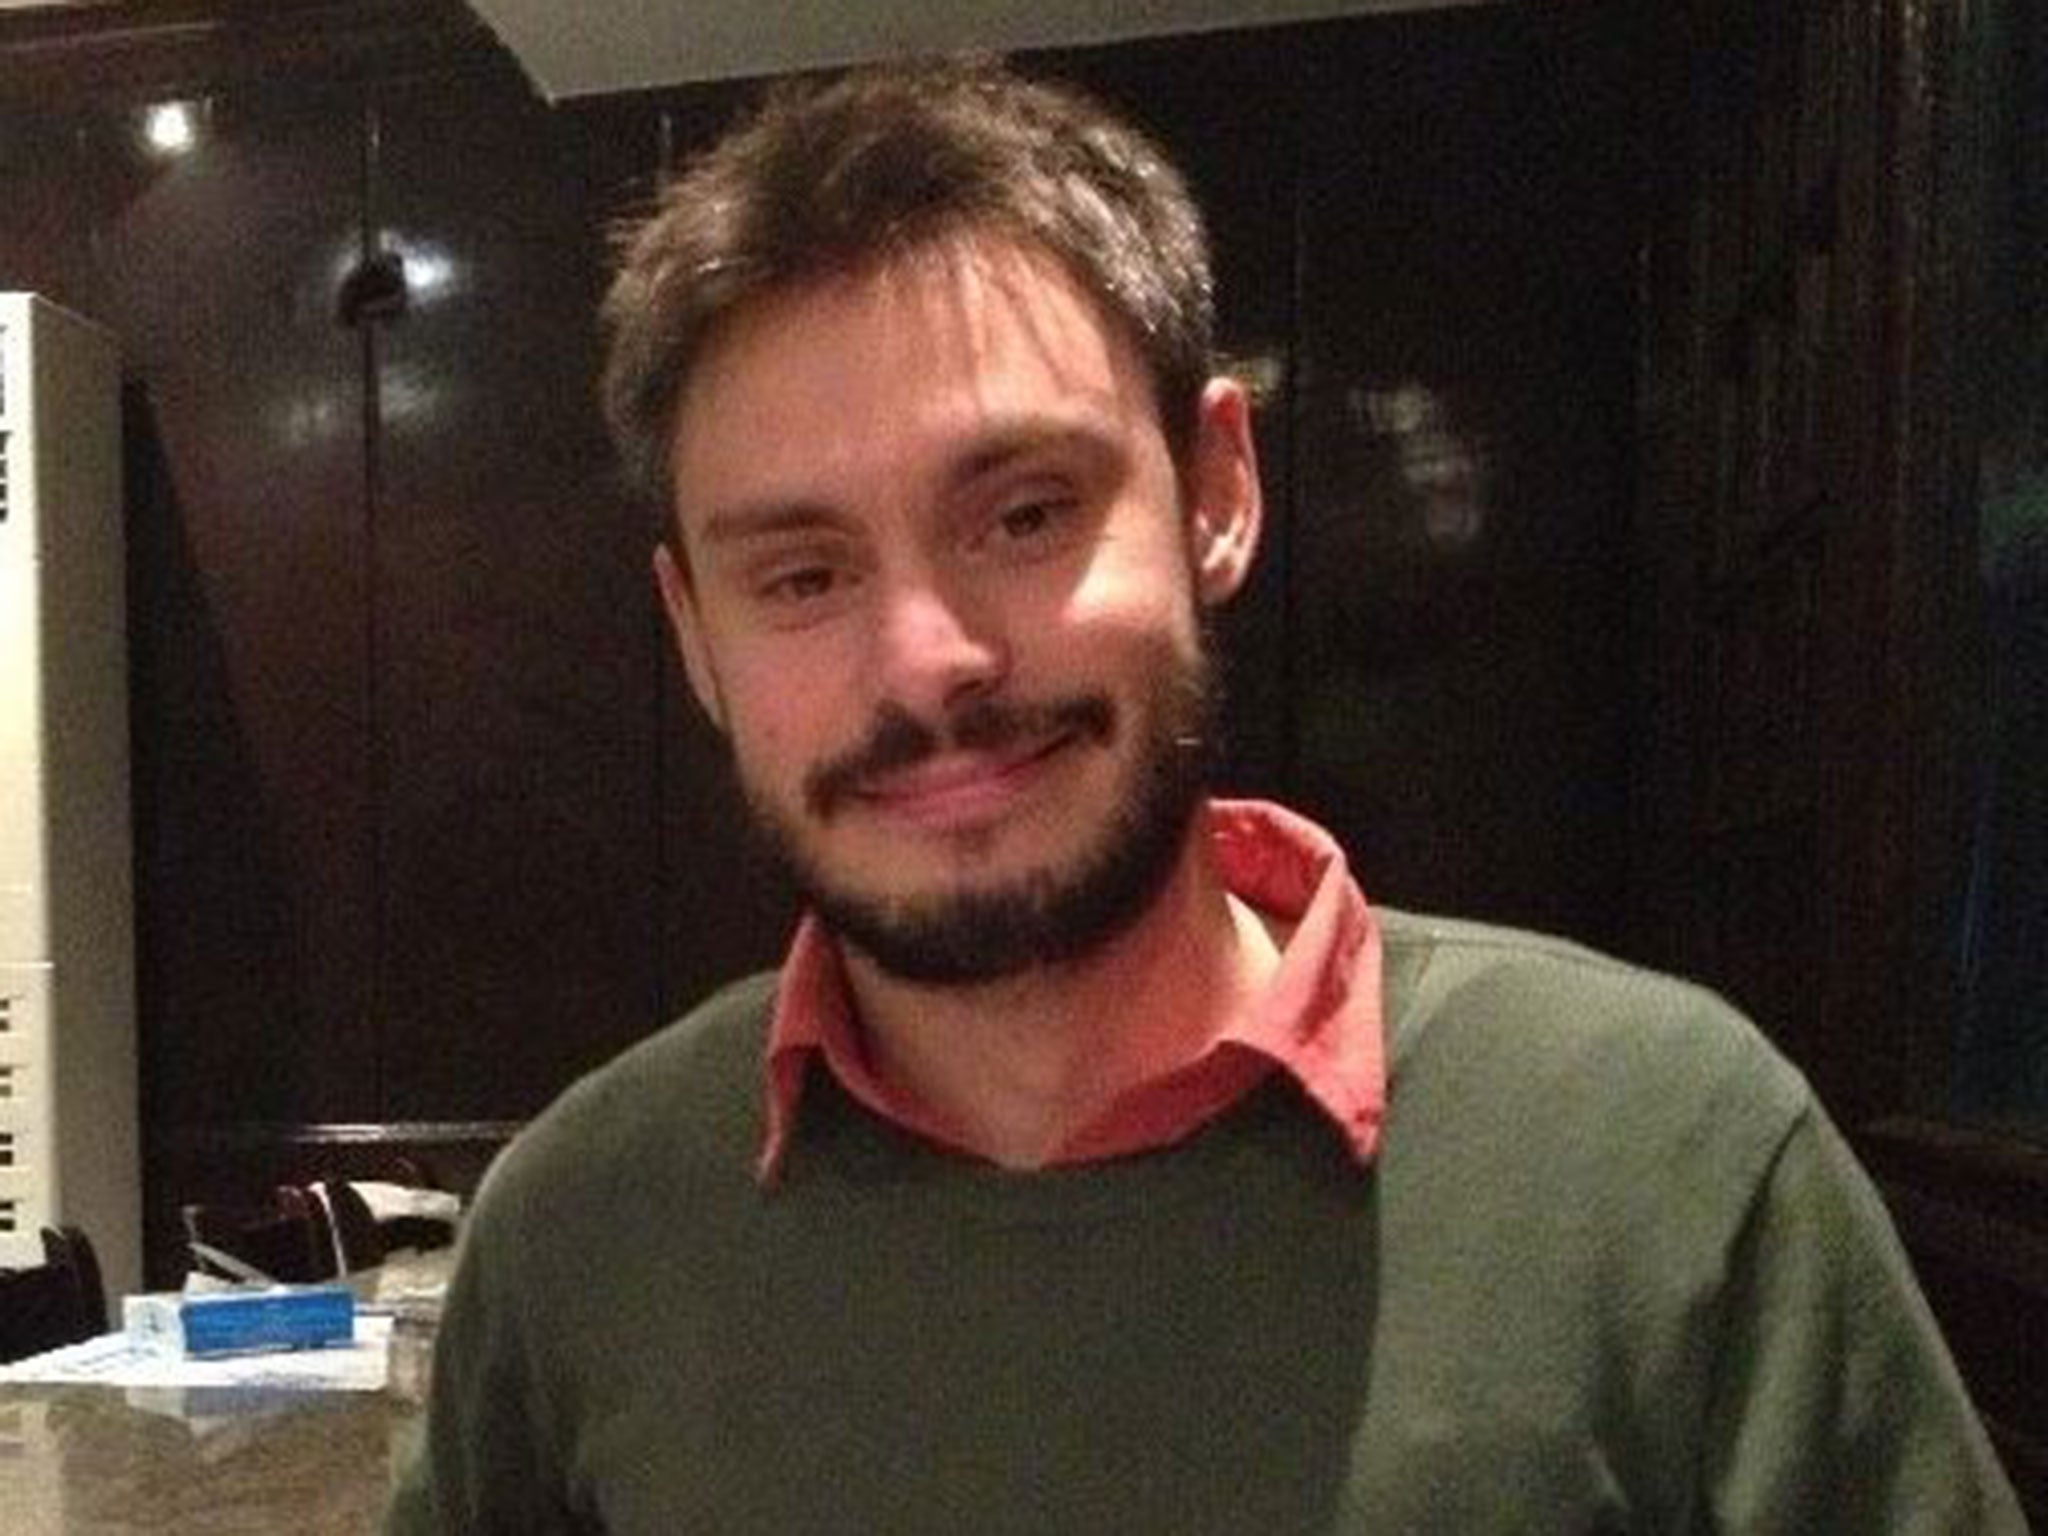 Giulio Regeni was found dead in a ditch just outside Cairo on 25 January with 'signs of torture'